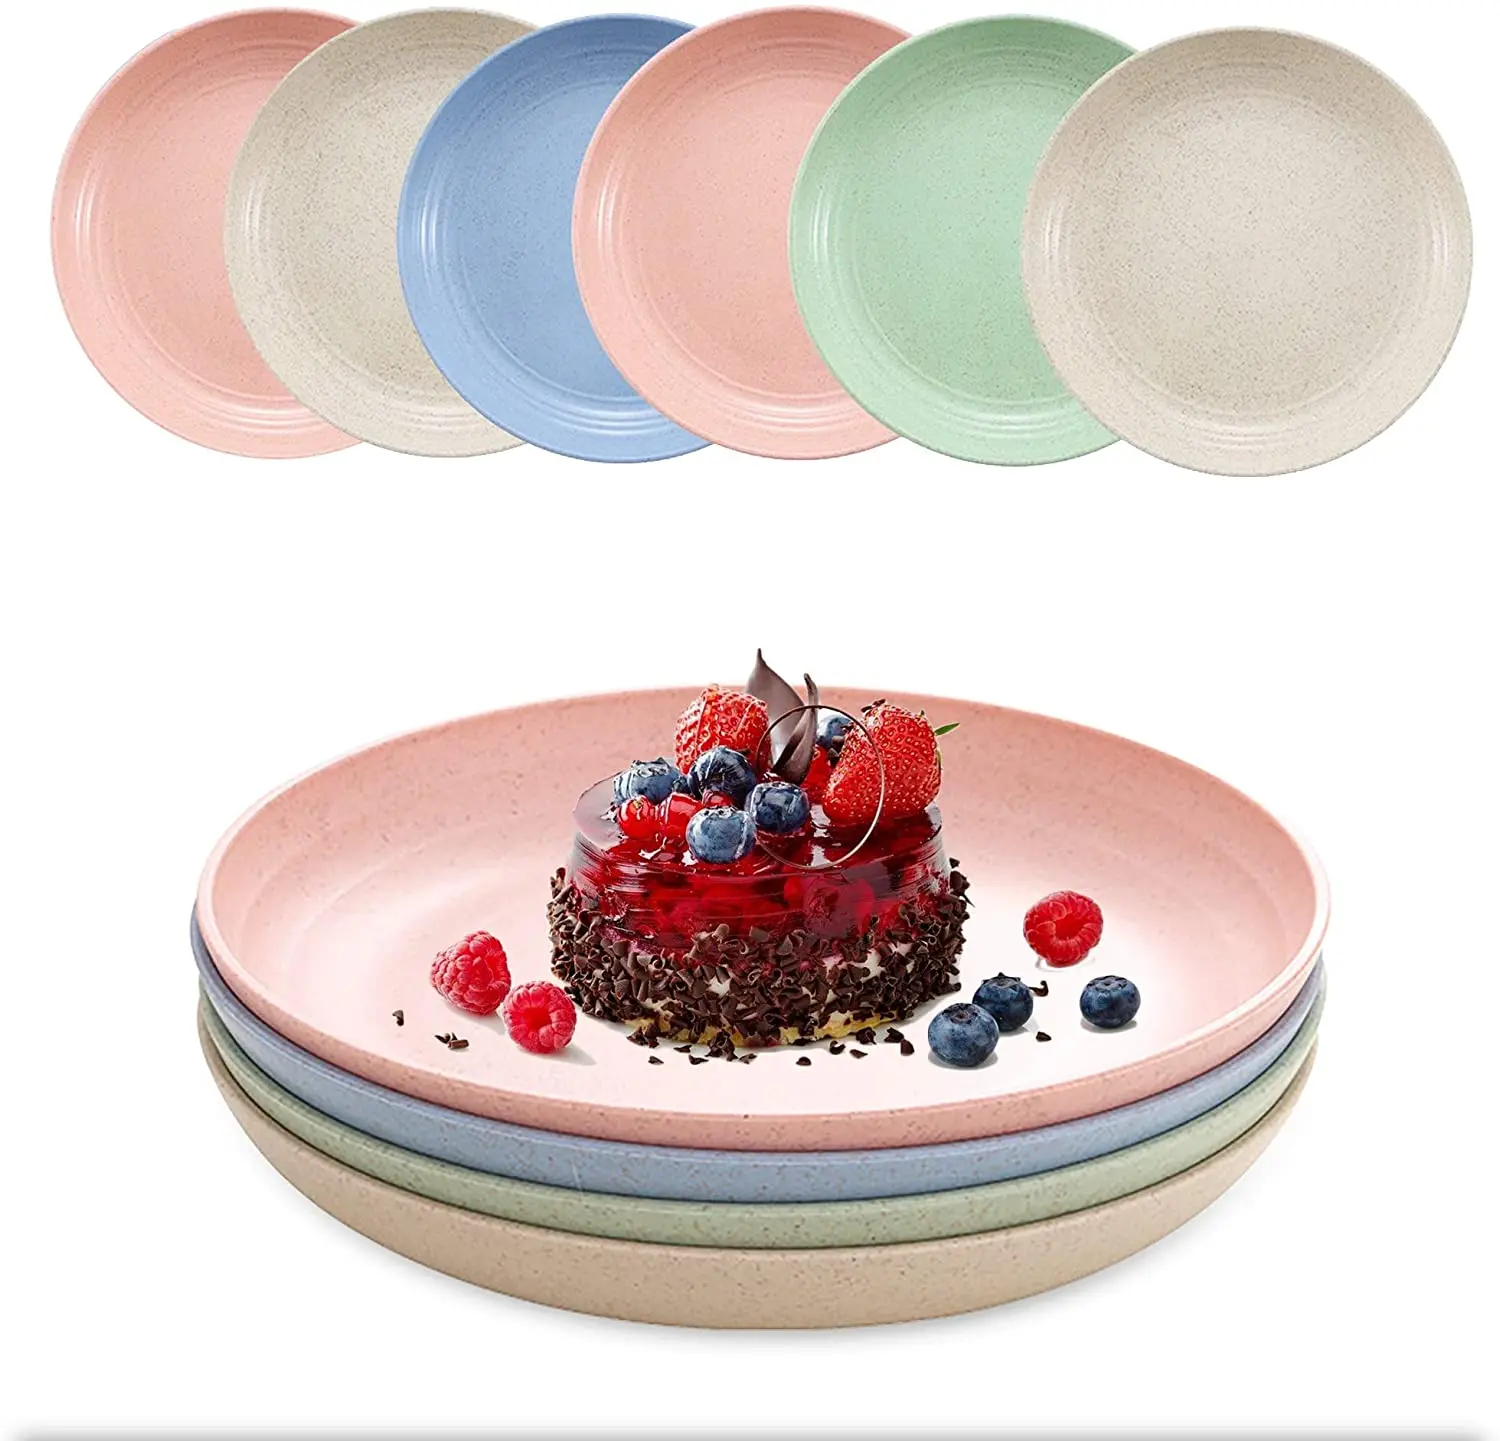 

Tabletex 7.8 Inch Wheat Straw Deep Dinner Plates Microwave and Dishwasher Safe Unbreakable Sturdy Plastic Dinner Plates Set of 6, Customized color